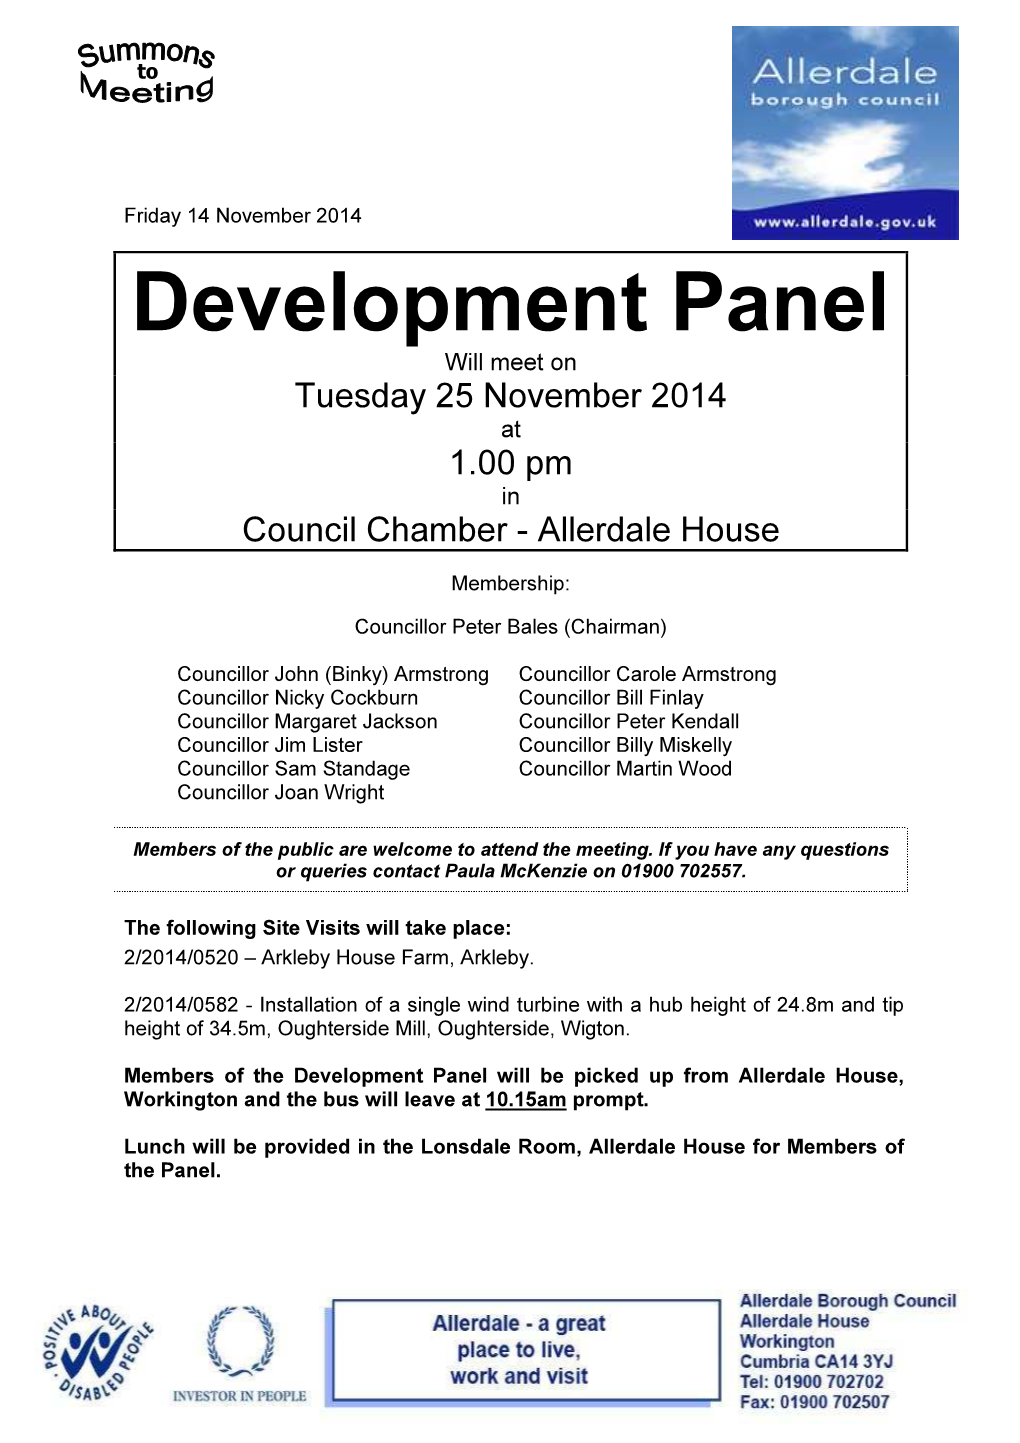 Development Panel Will Meet on Tuesday 25 November 2014 at 1.00 Pm in Council Chamber - Allerdale House